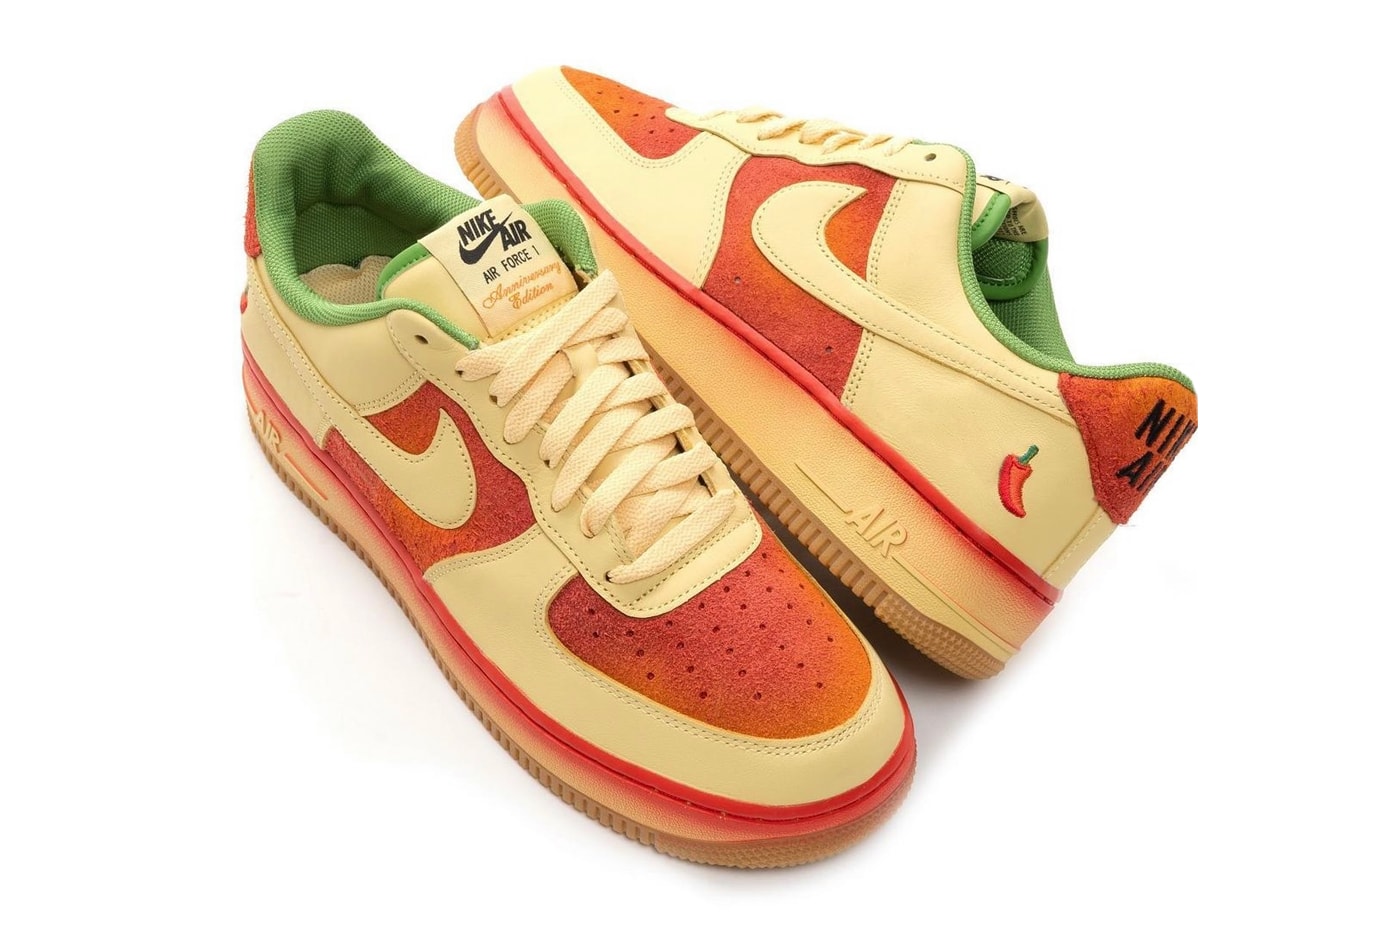 Nike Air Force 1 Low Chili Pepper First Look